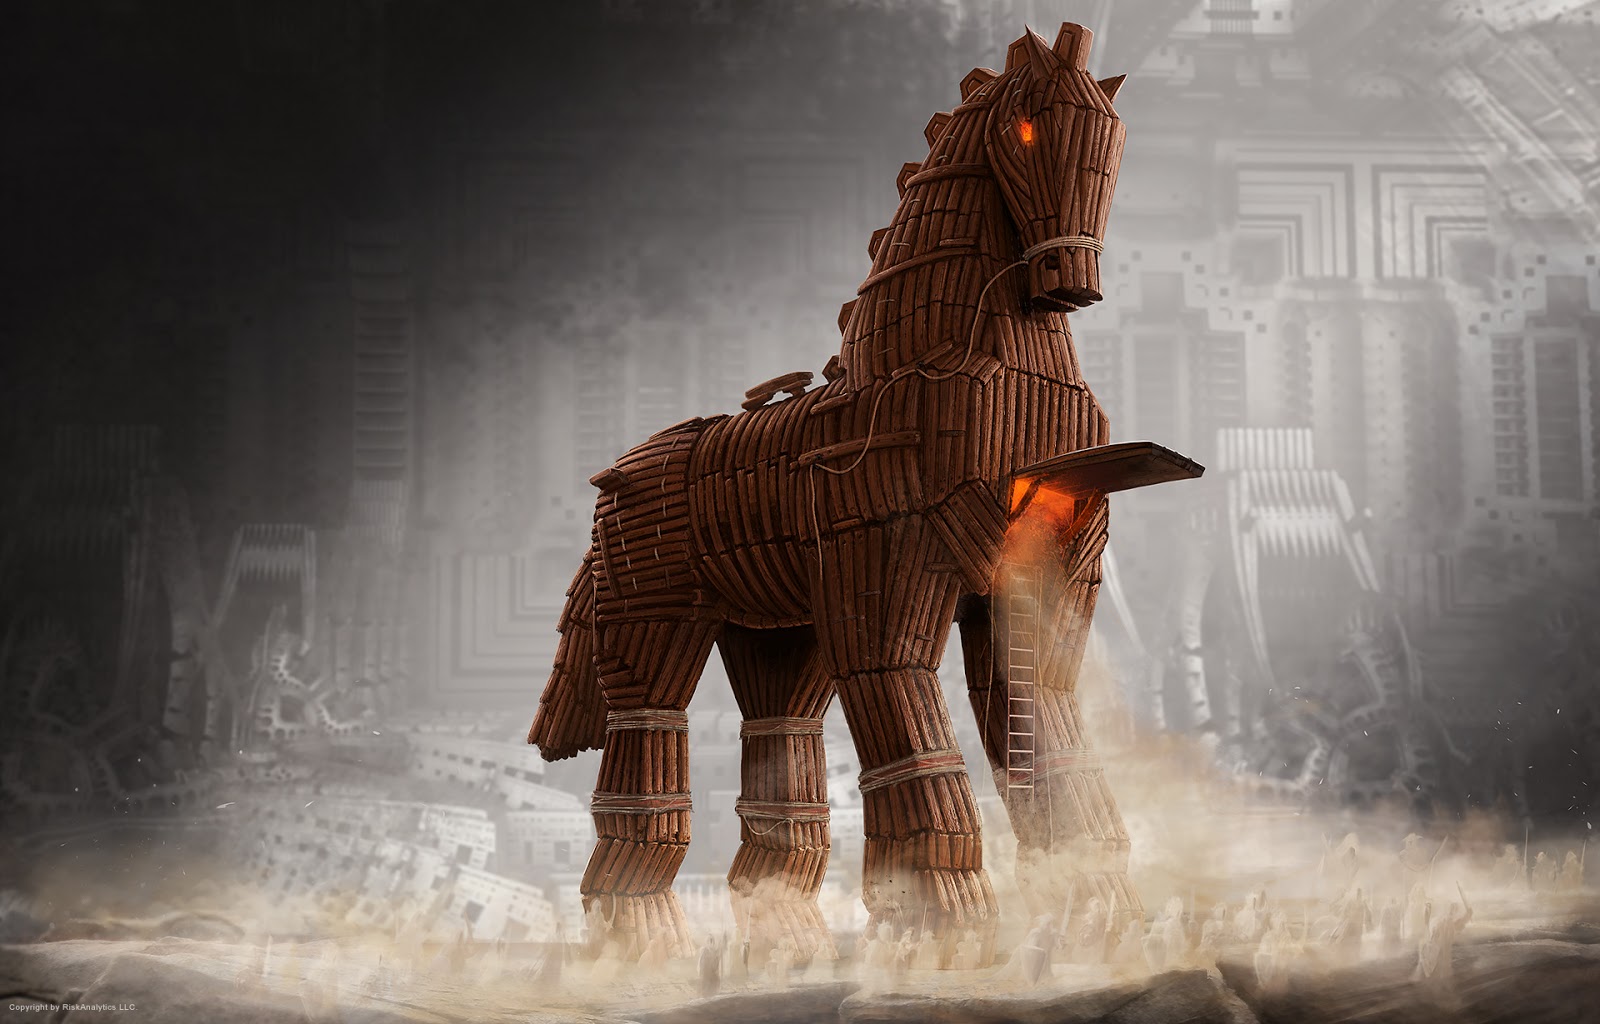 The Art Of Security: Sirens, Box of Pandora and Trojan Horse ~ The